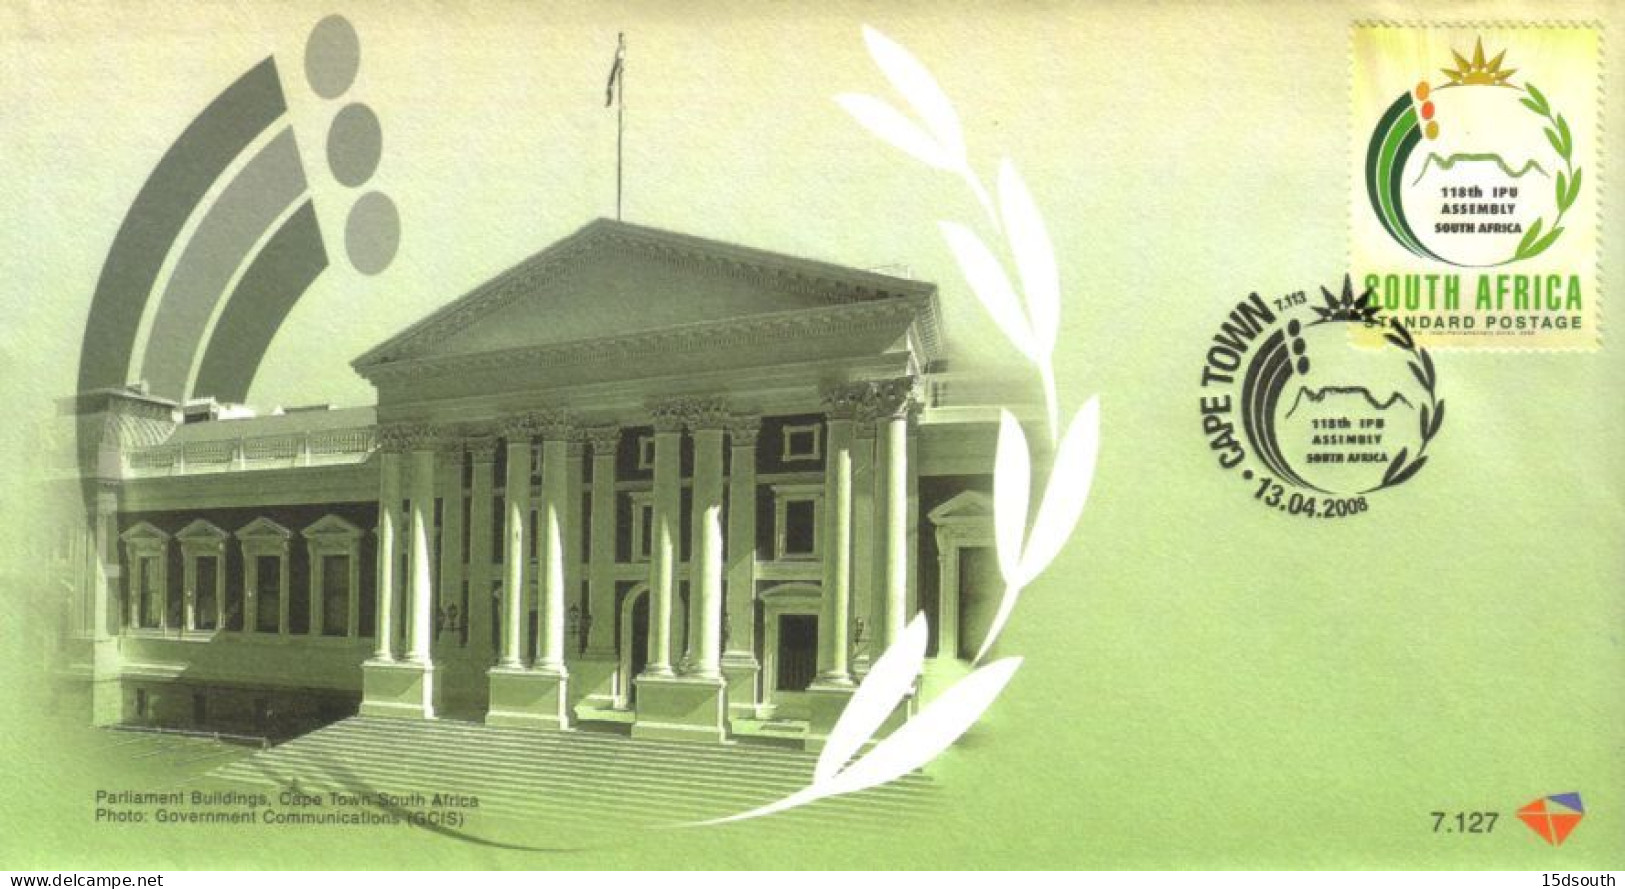 South Africa - 2008 118th IPU Assembly FDC # SG 1650 - FDC